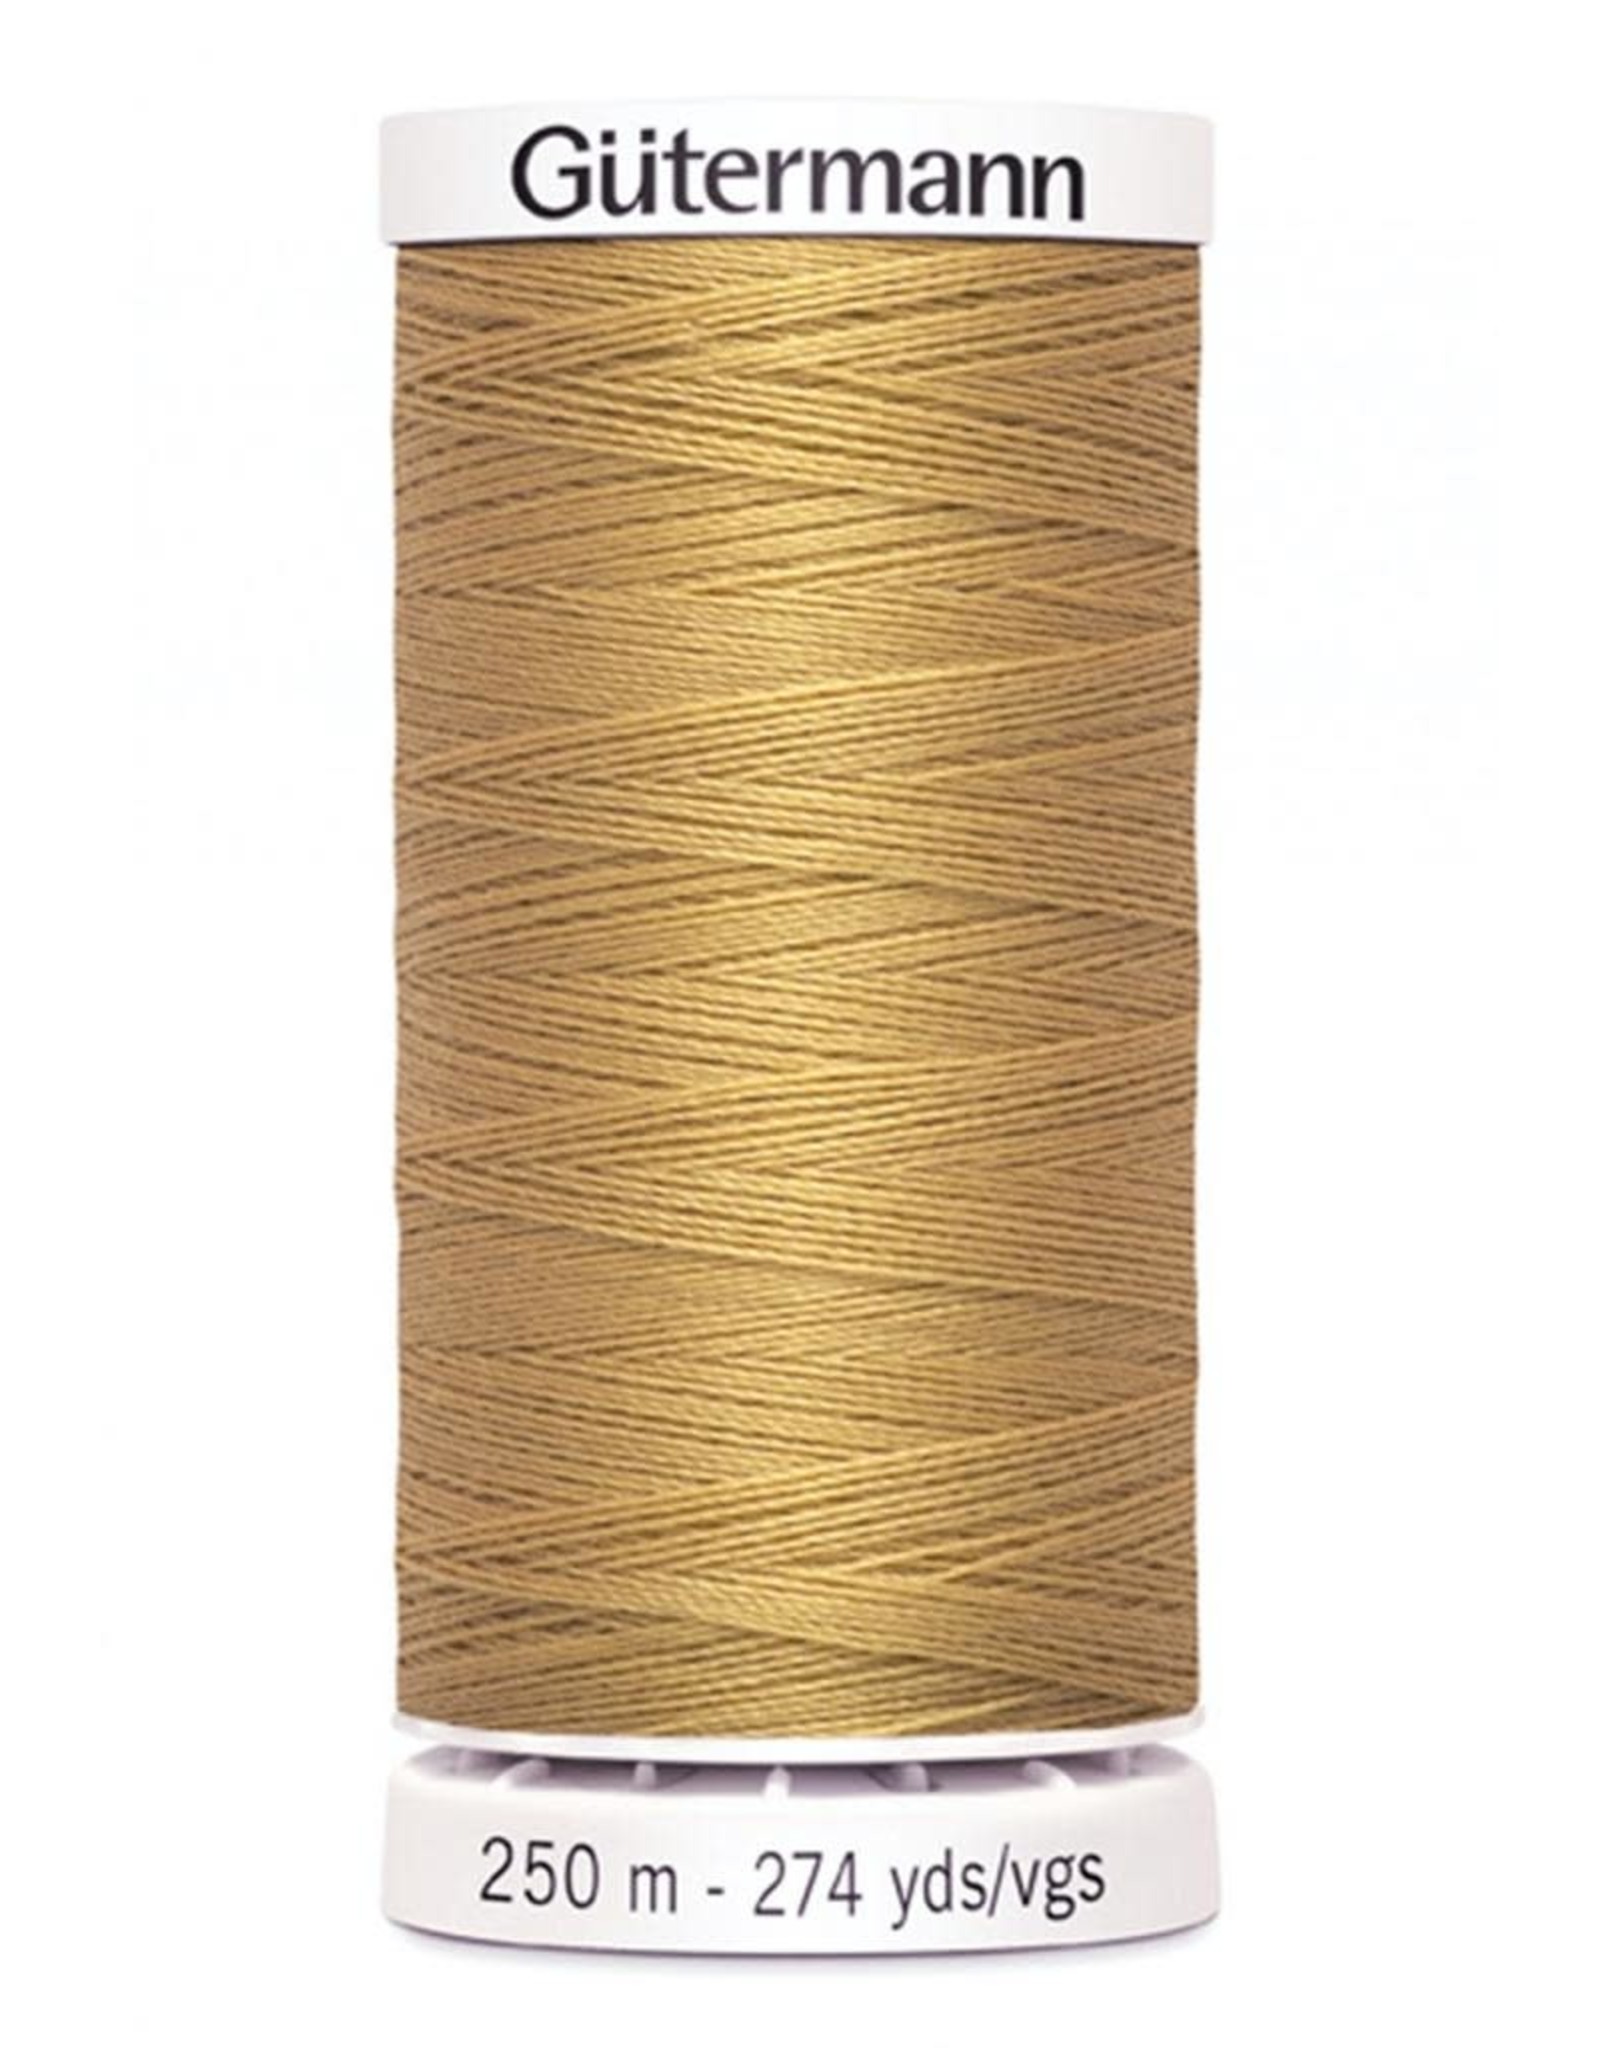 Sewing Thread - Polyester Threads for Hand Stitching, Quilting and